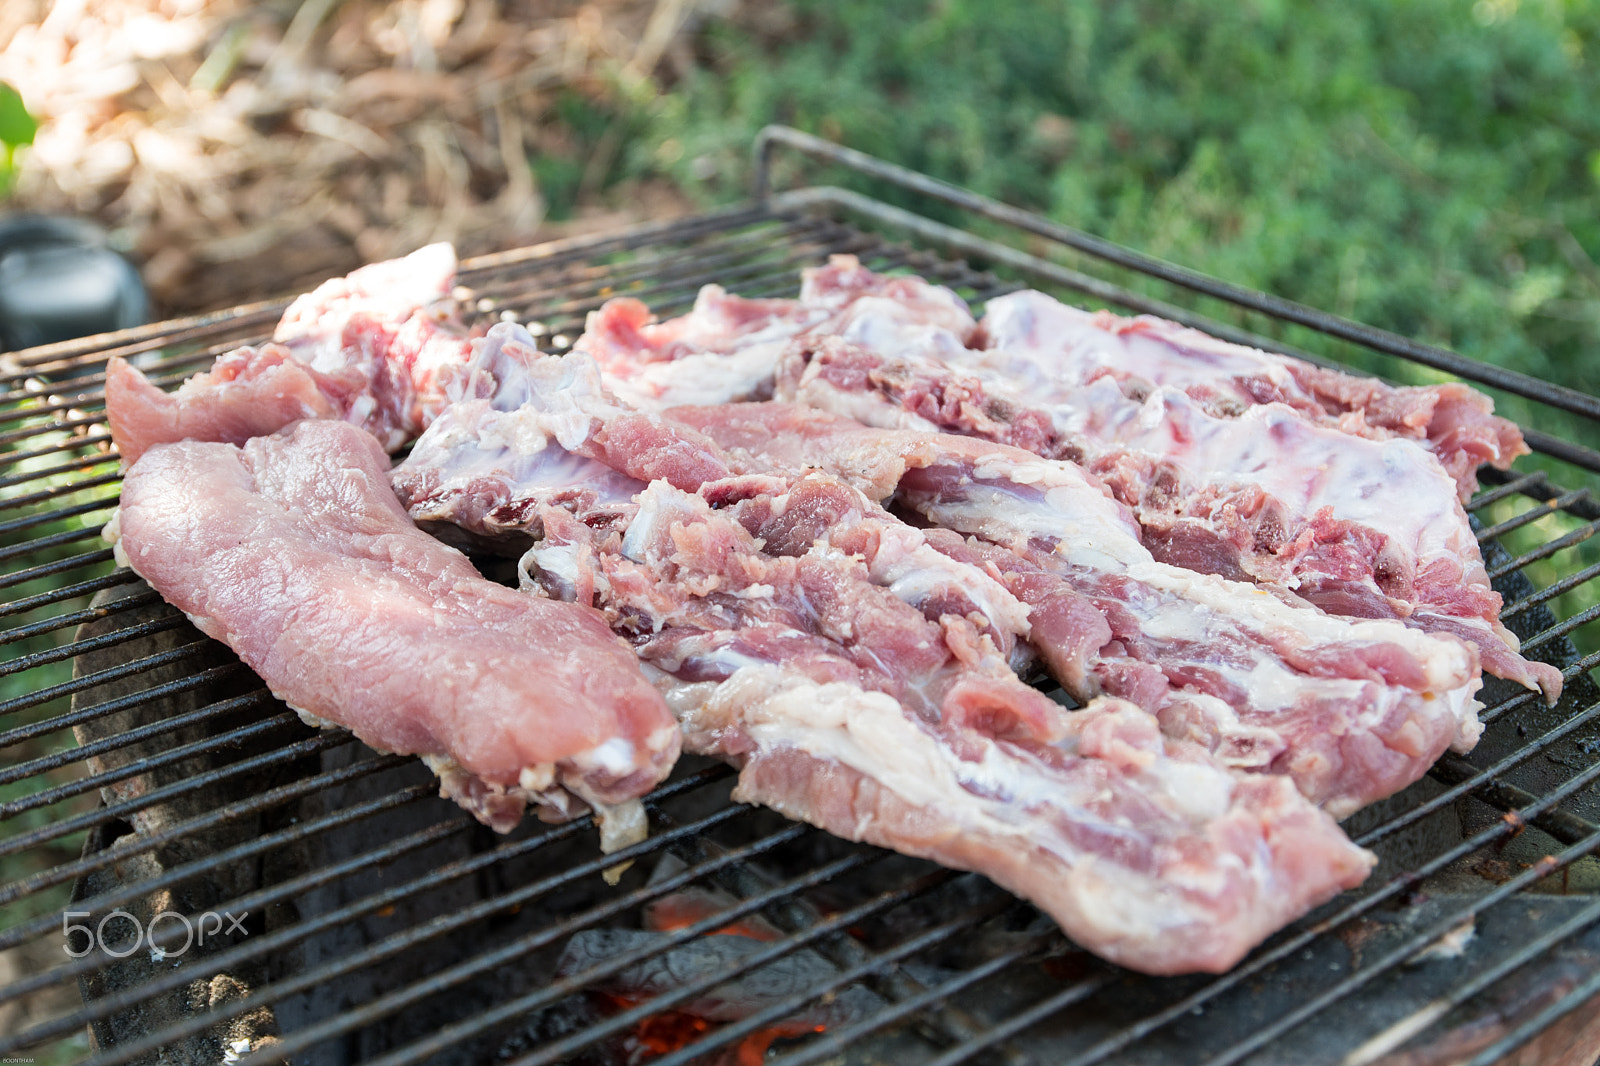 Nikon D500 + Tamron SP AF 17-50mm F2.8 XR Di II VC LD Aspherical (IF) sample photo. Pork rips grilled photography